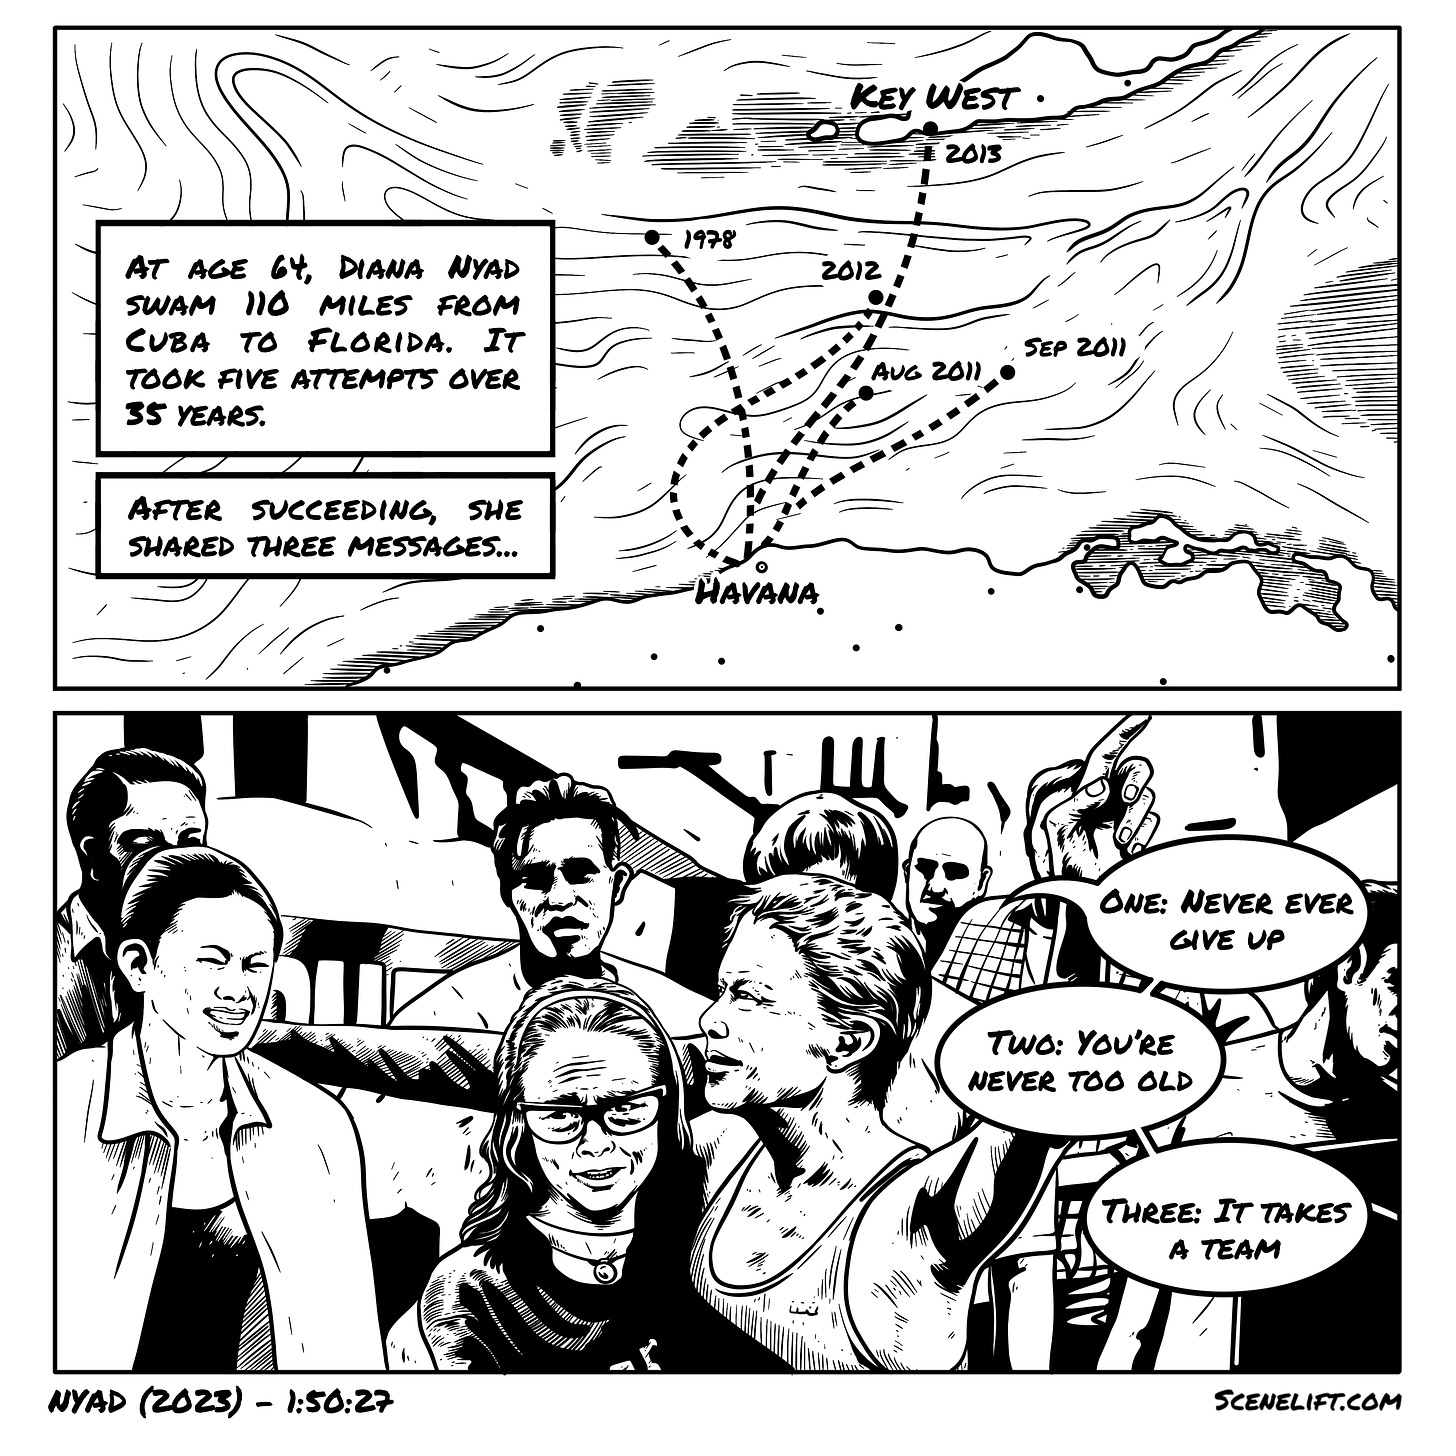 Movie comic are of final scene of Nyad (2023) that shows Diana's five attempts swimming from Cuba to Florida and the three messages she shared when she succeeded and arrived in Key West